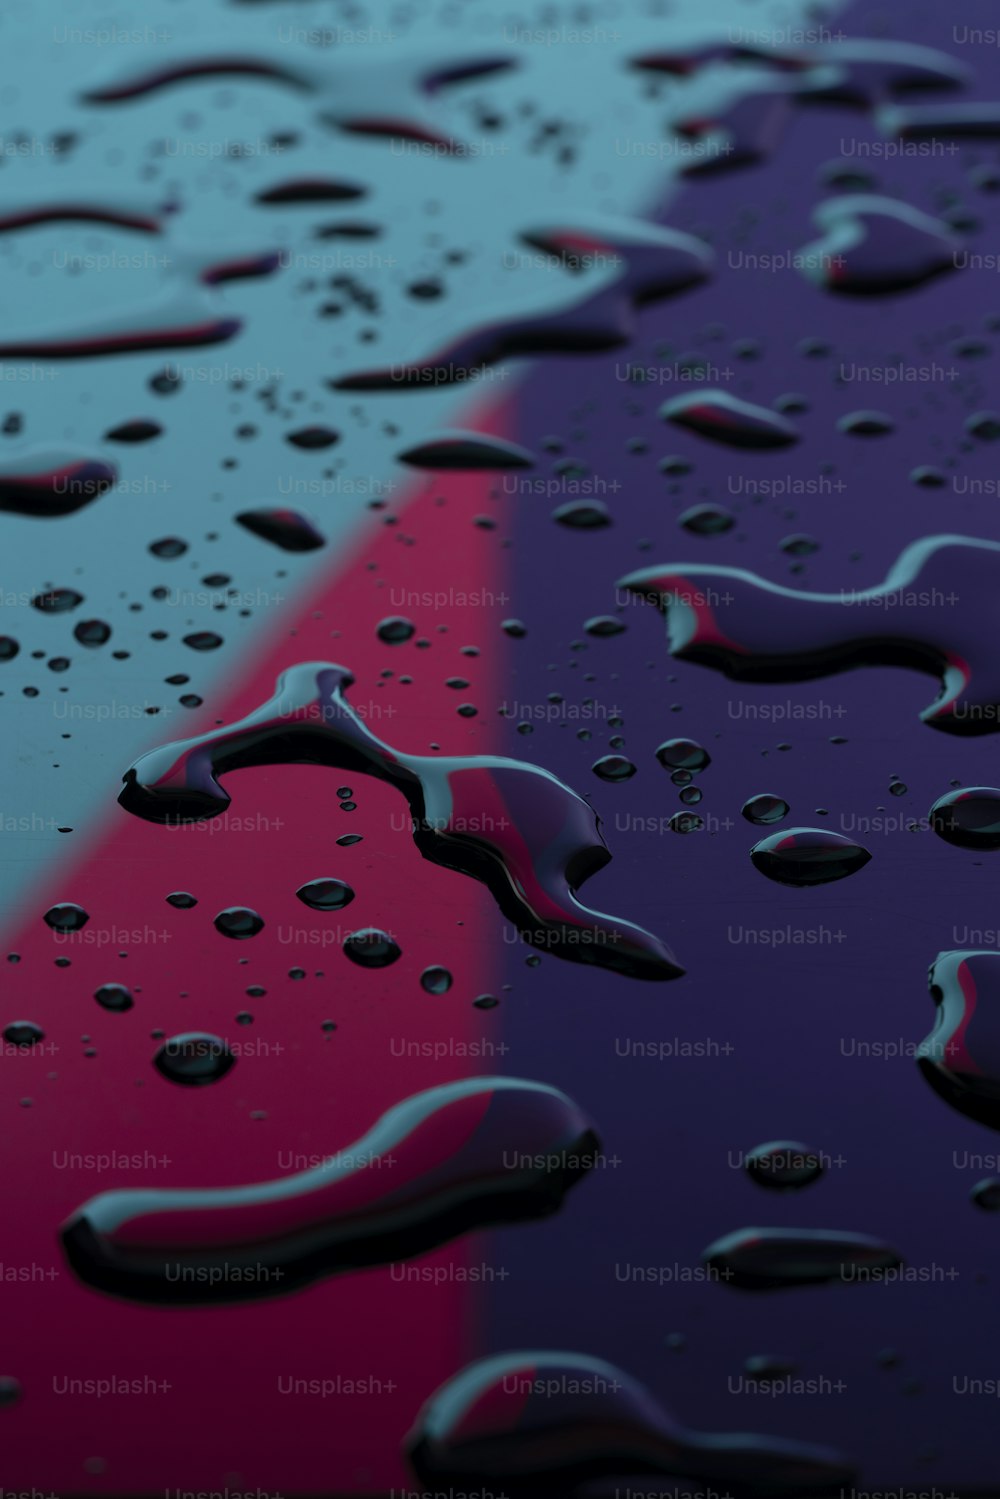 a close up of water droplets on a colorful surface